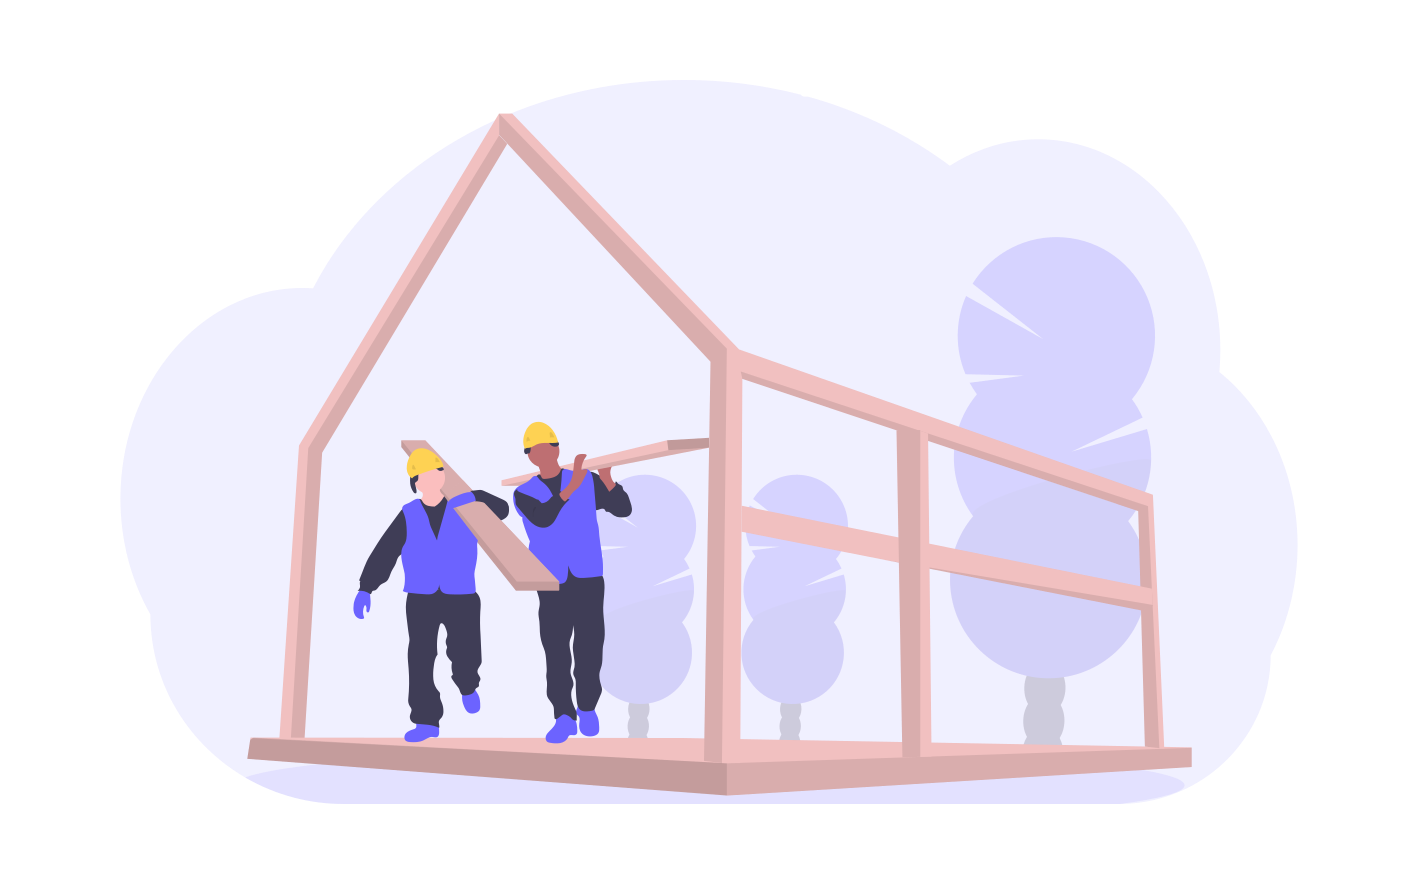 image of two people constructing a house